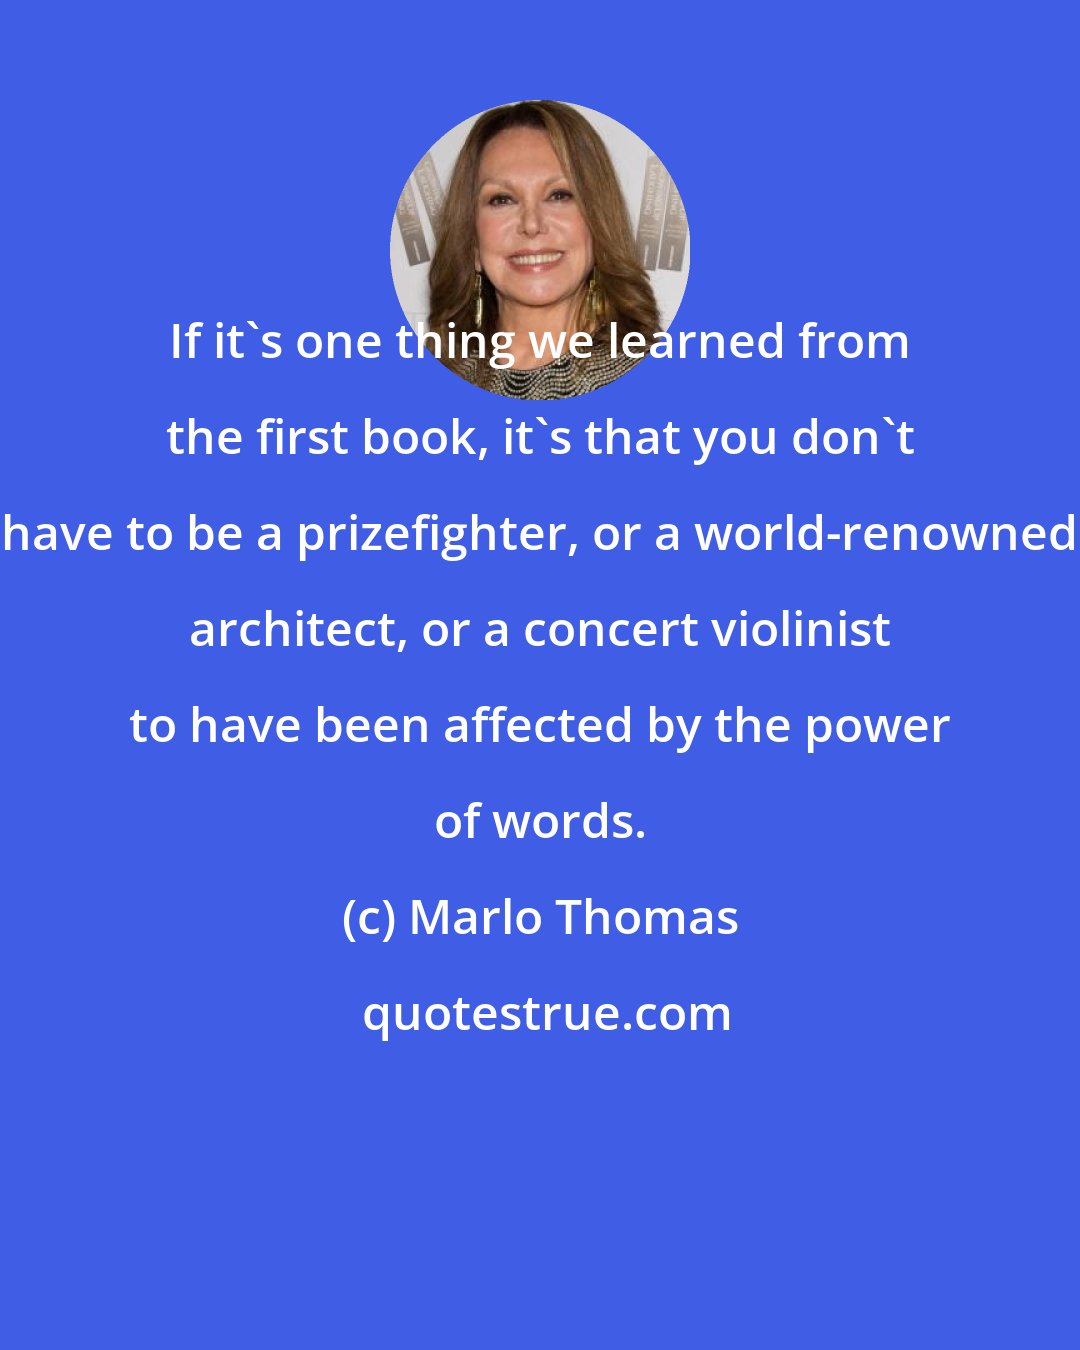 Marlo Thomas: If it's one thing we learned from the first book, it's that you don't have to be a prizefighter, or a world-renowned architect, or a concert violinist to have been affected by the power of words.